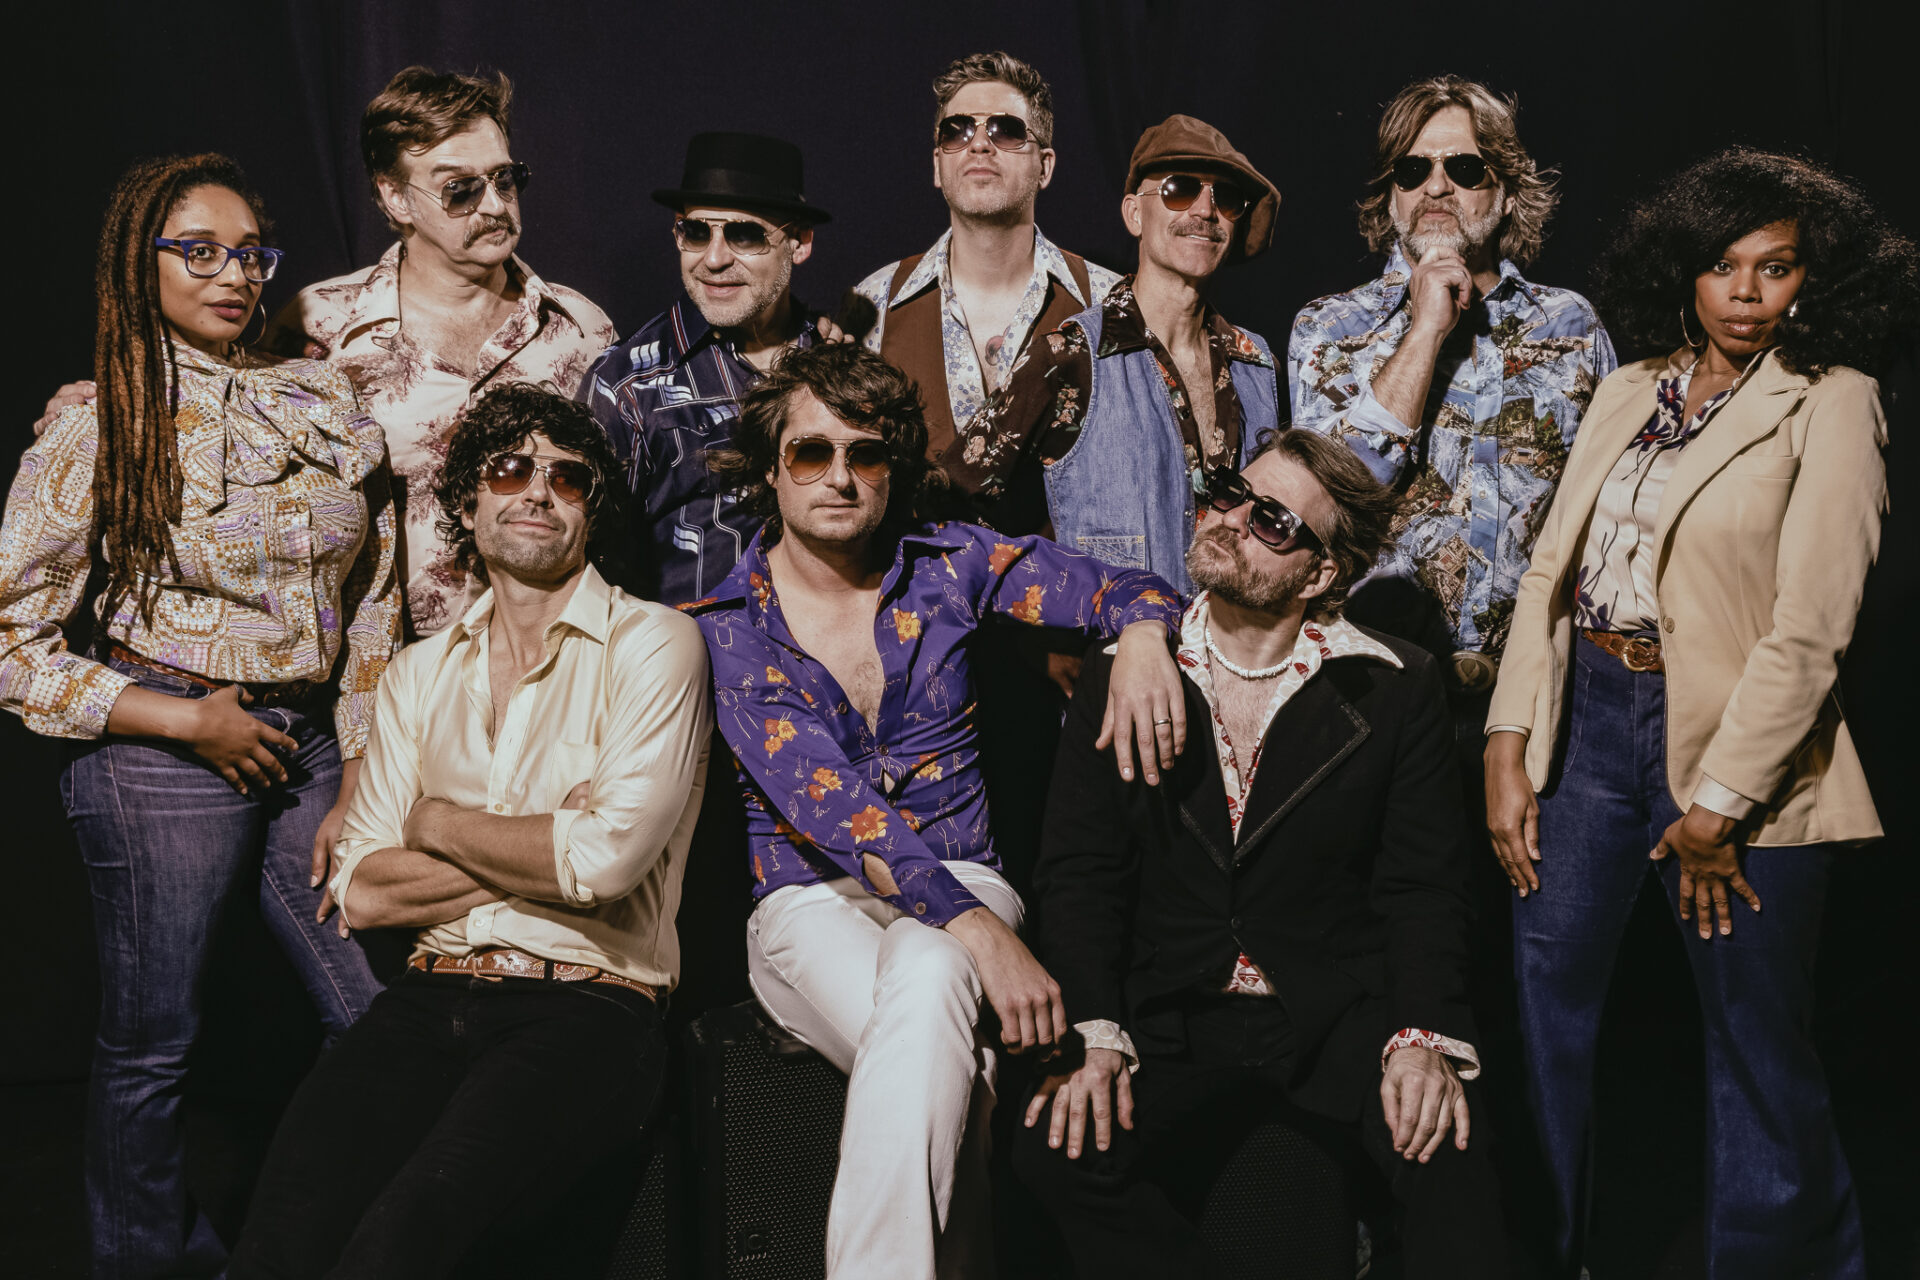 Yacht Rock Revue - YACHT ROCK REVUE 70S AND 80S HITS, LIVE FROM NEW YORK